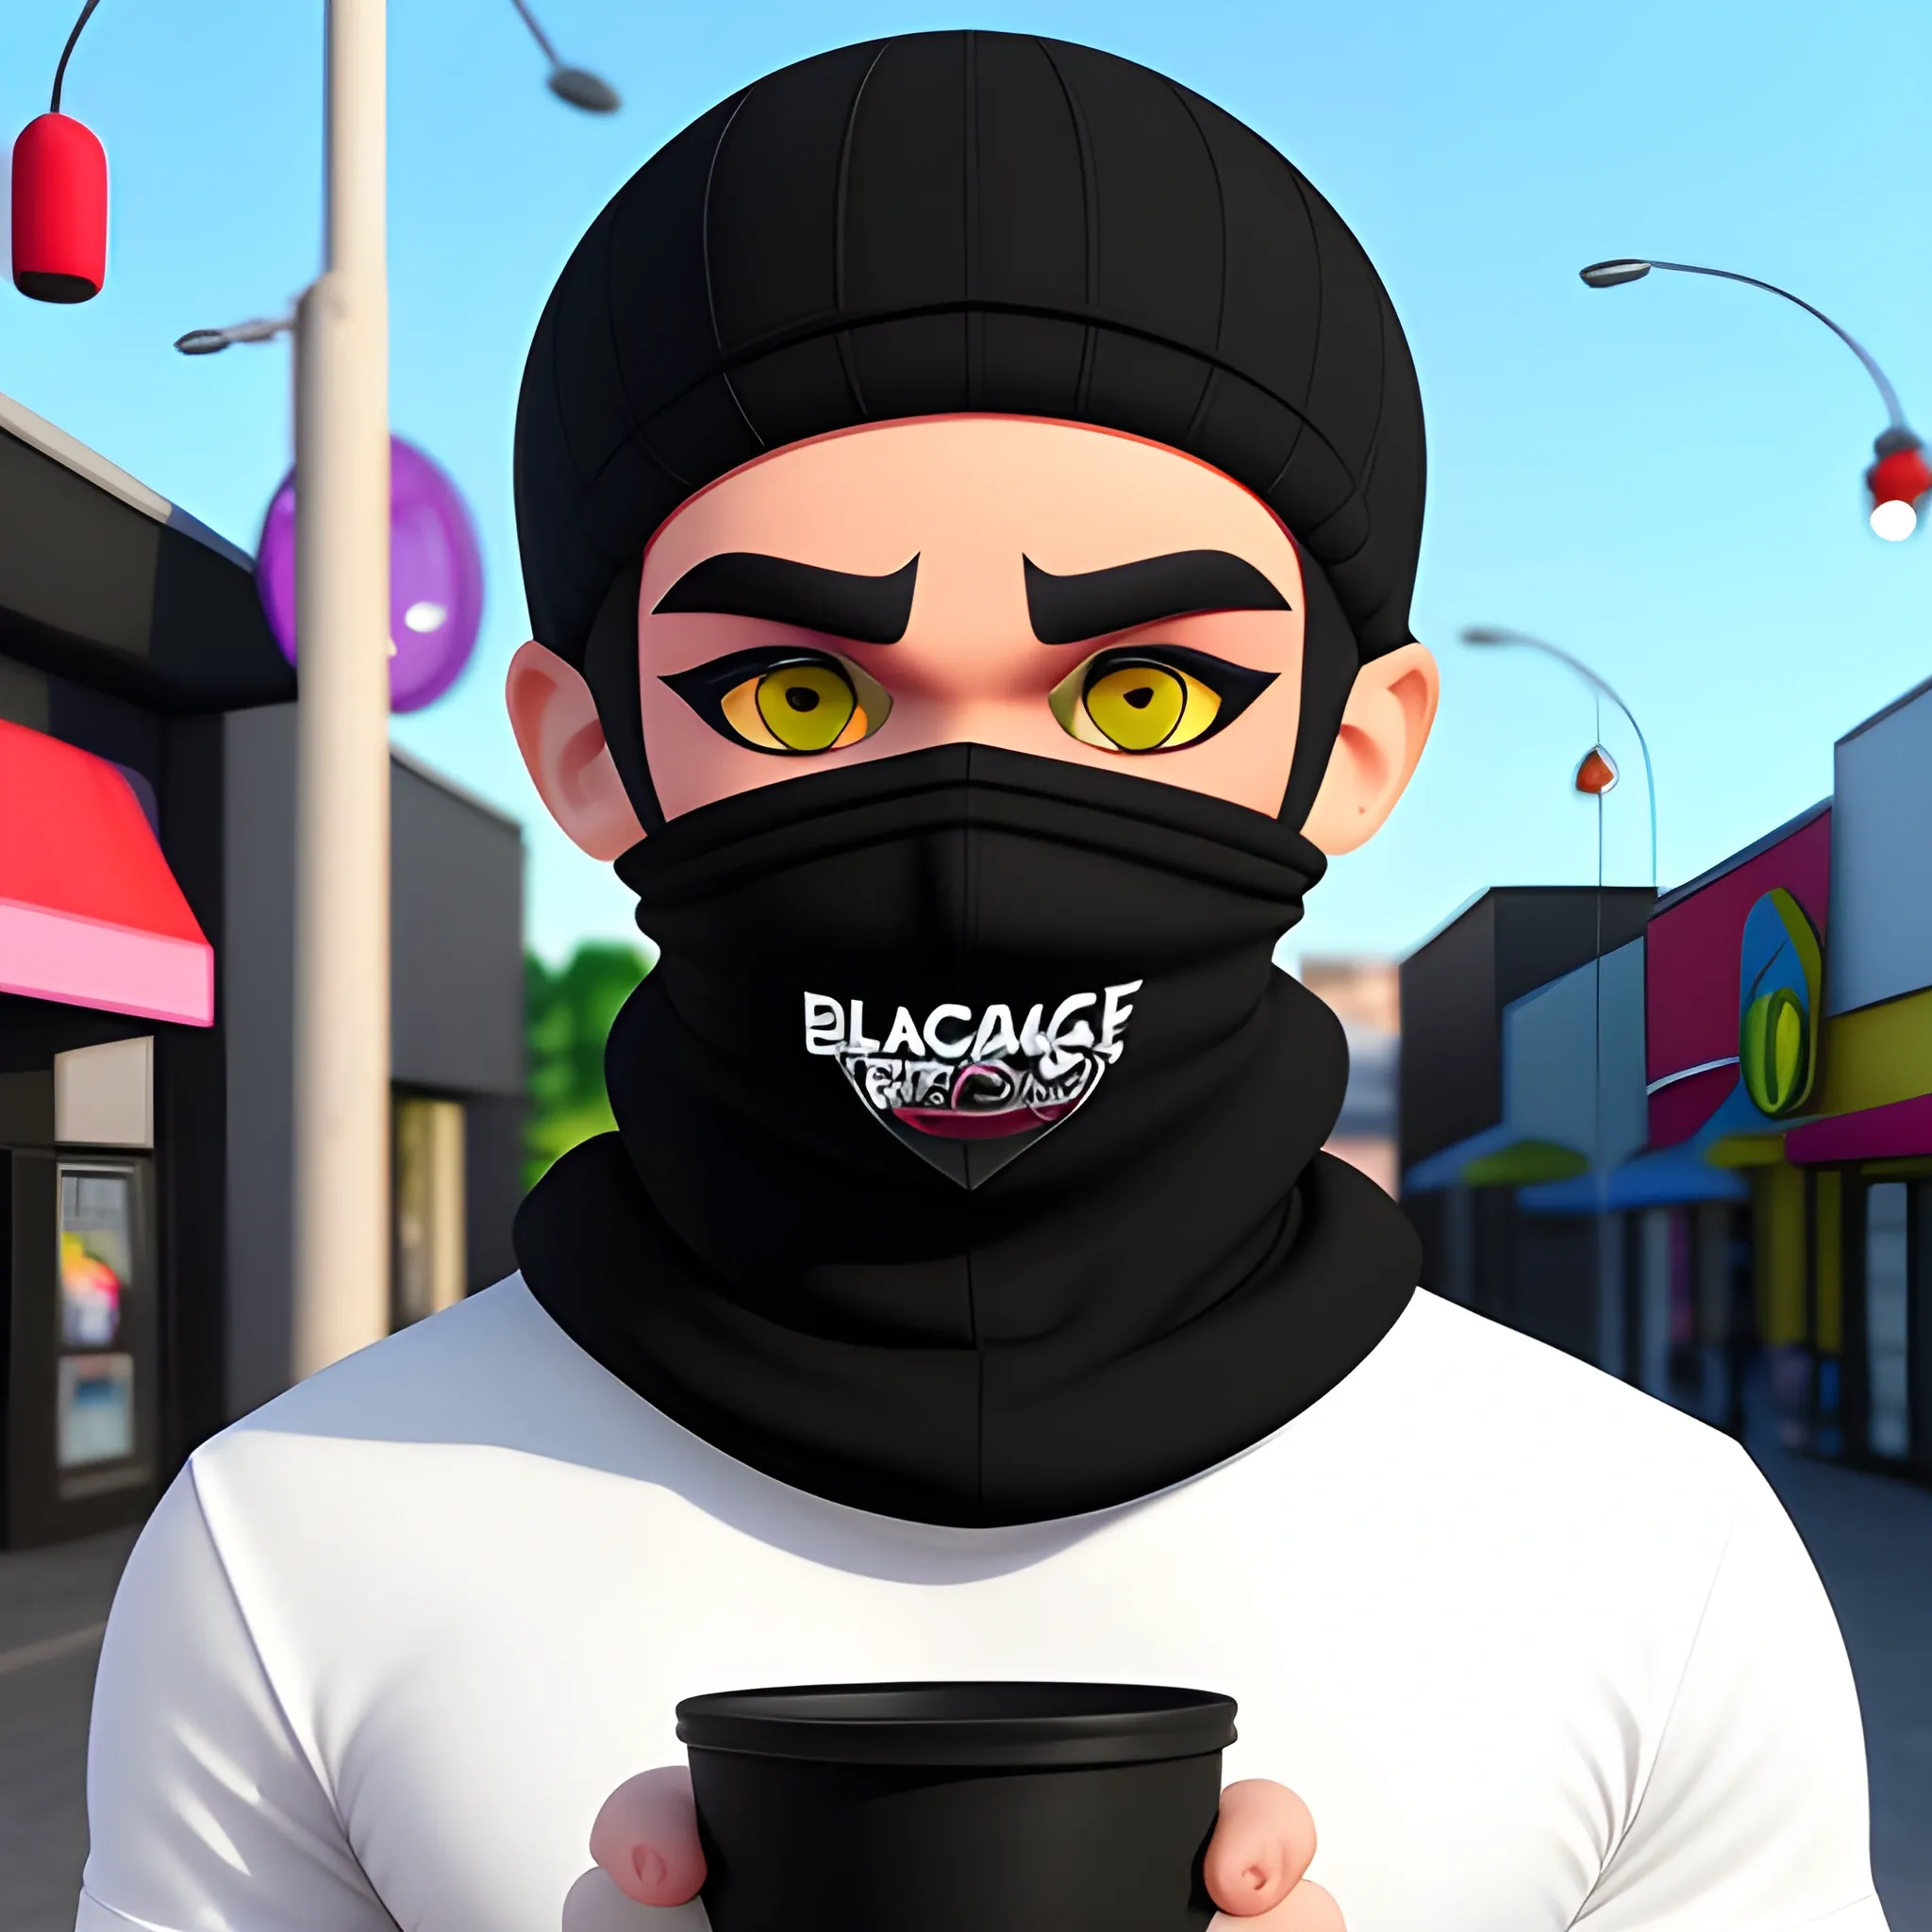 Imagine creating a Bratz-style male character. The character wears a black balaclava. In one hand, he holds a white cup, similar to those used in fast-food chains like McDonald's.
, 3D